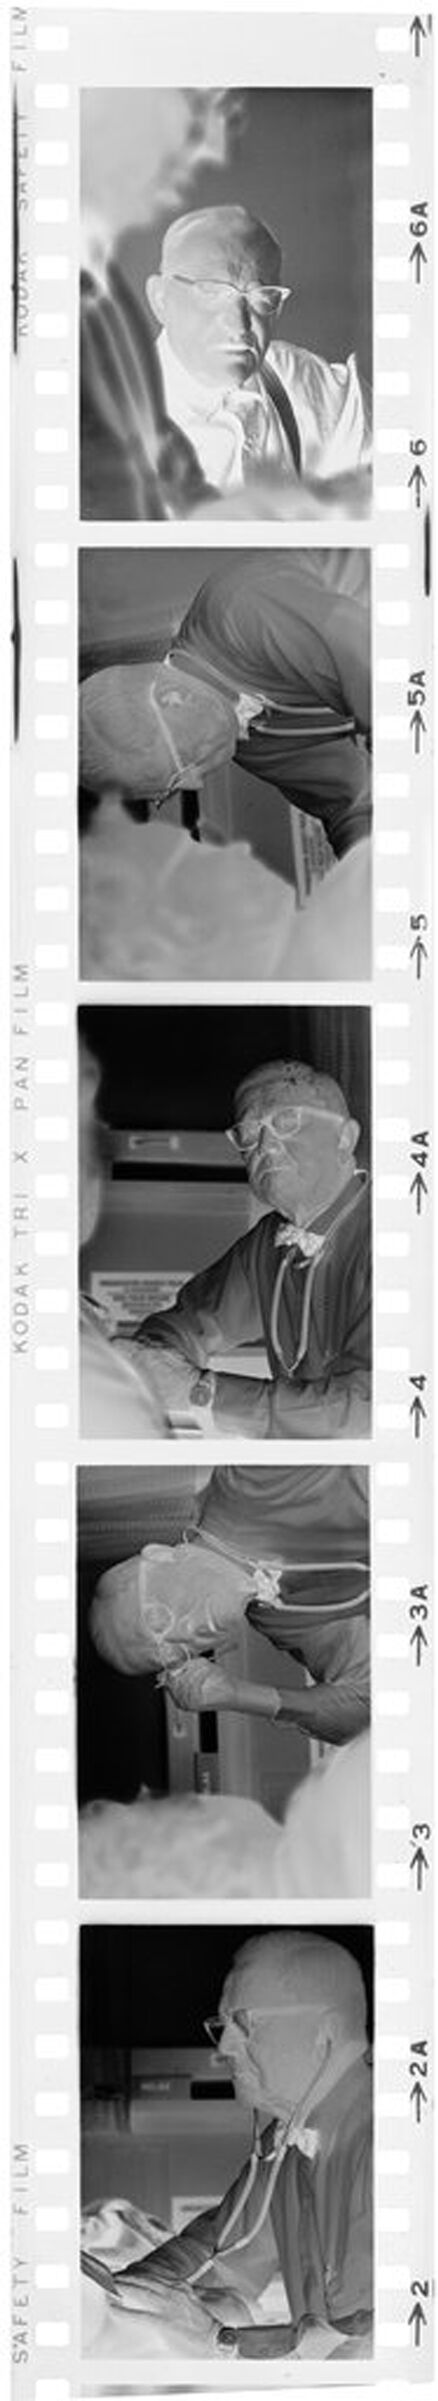 Untitled (Dr. Herman M. Juergens Talking With Patients In Exam Room)